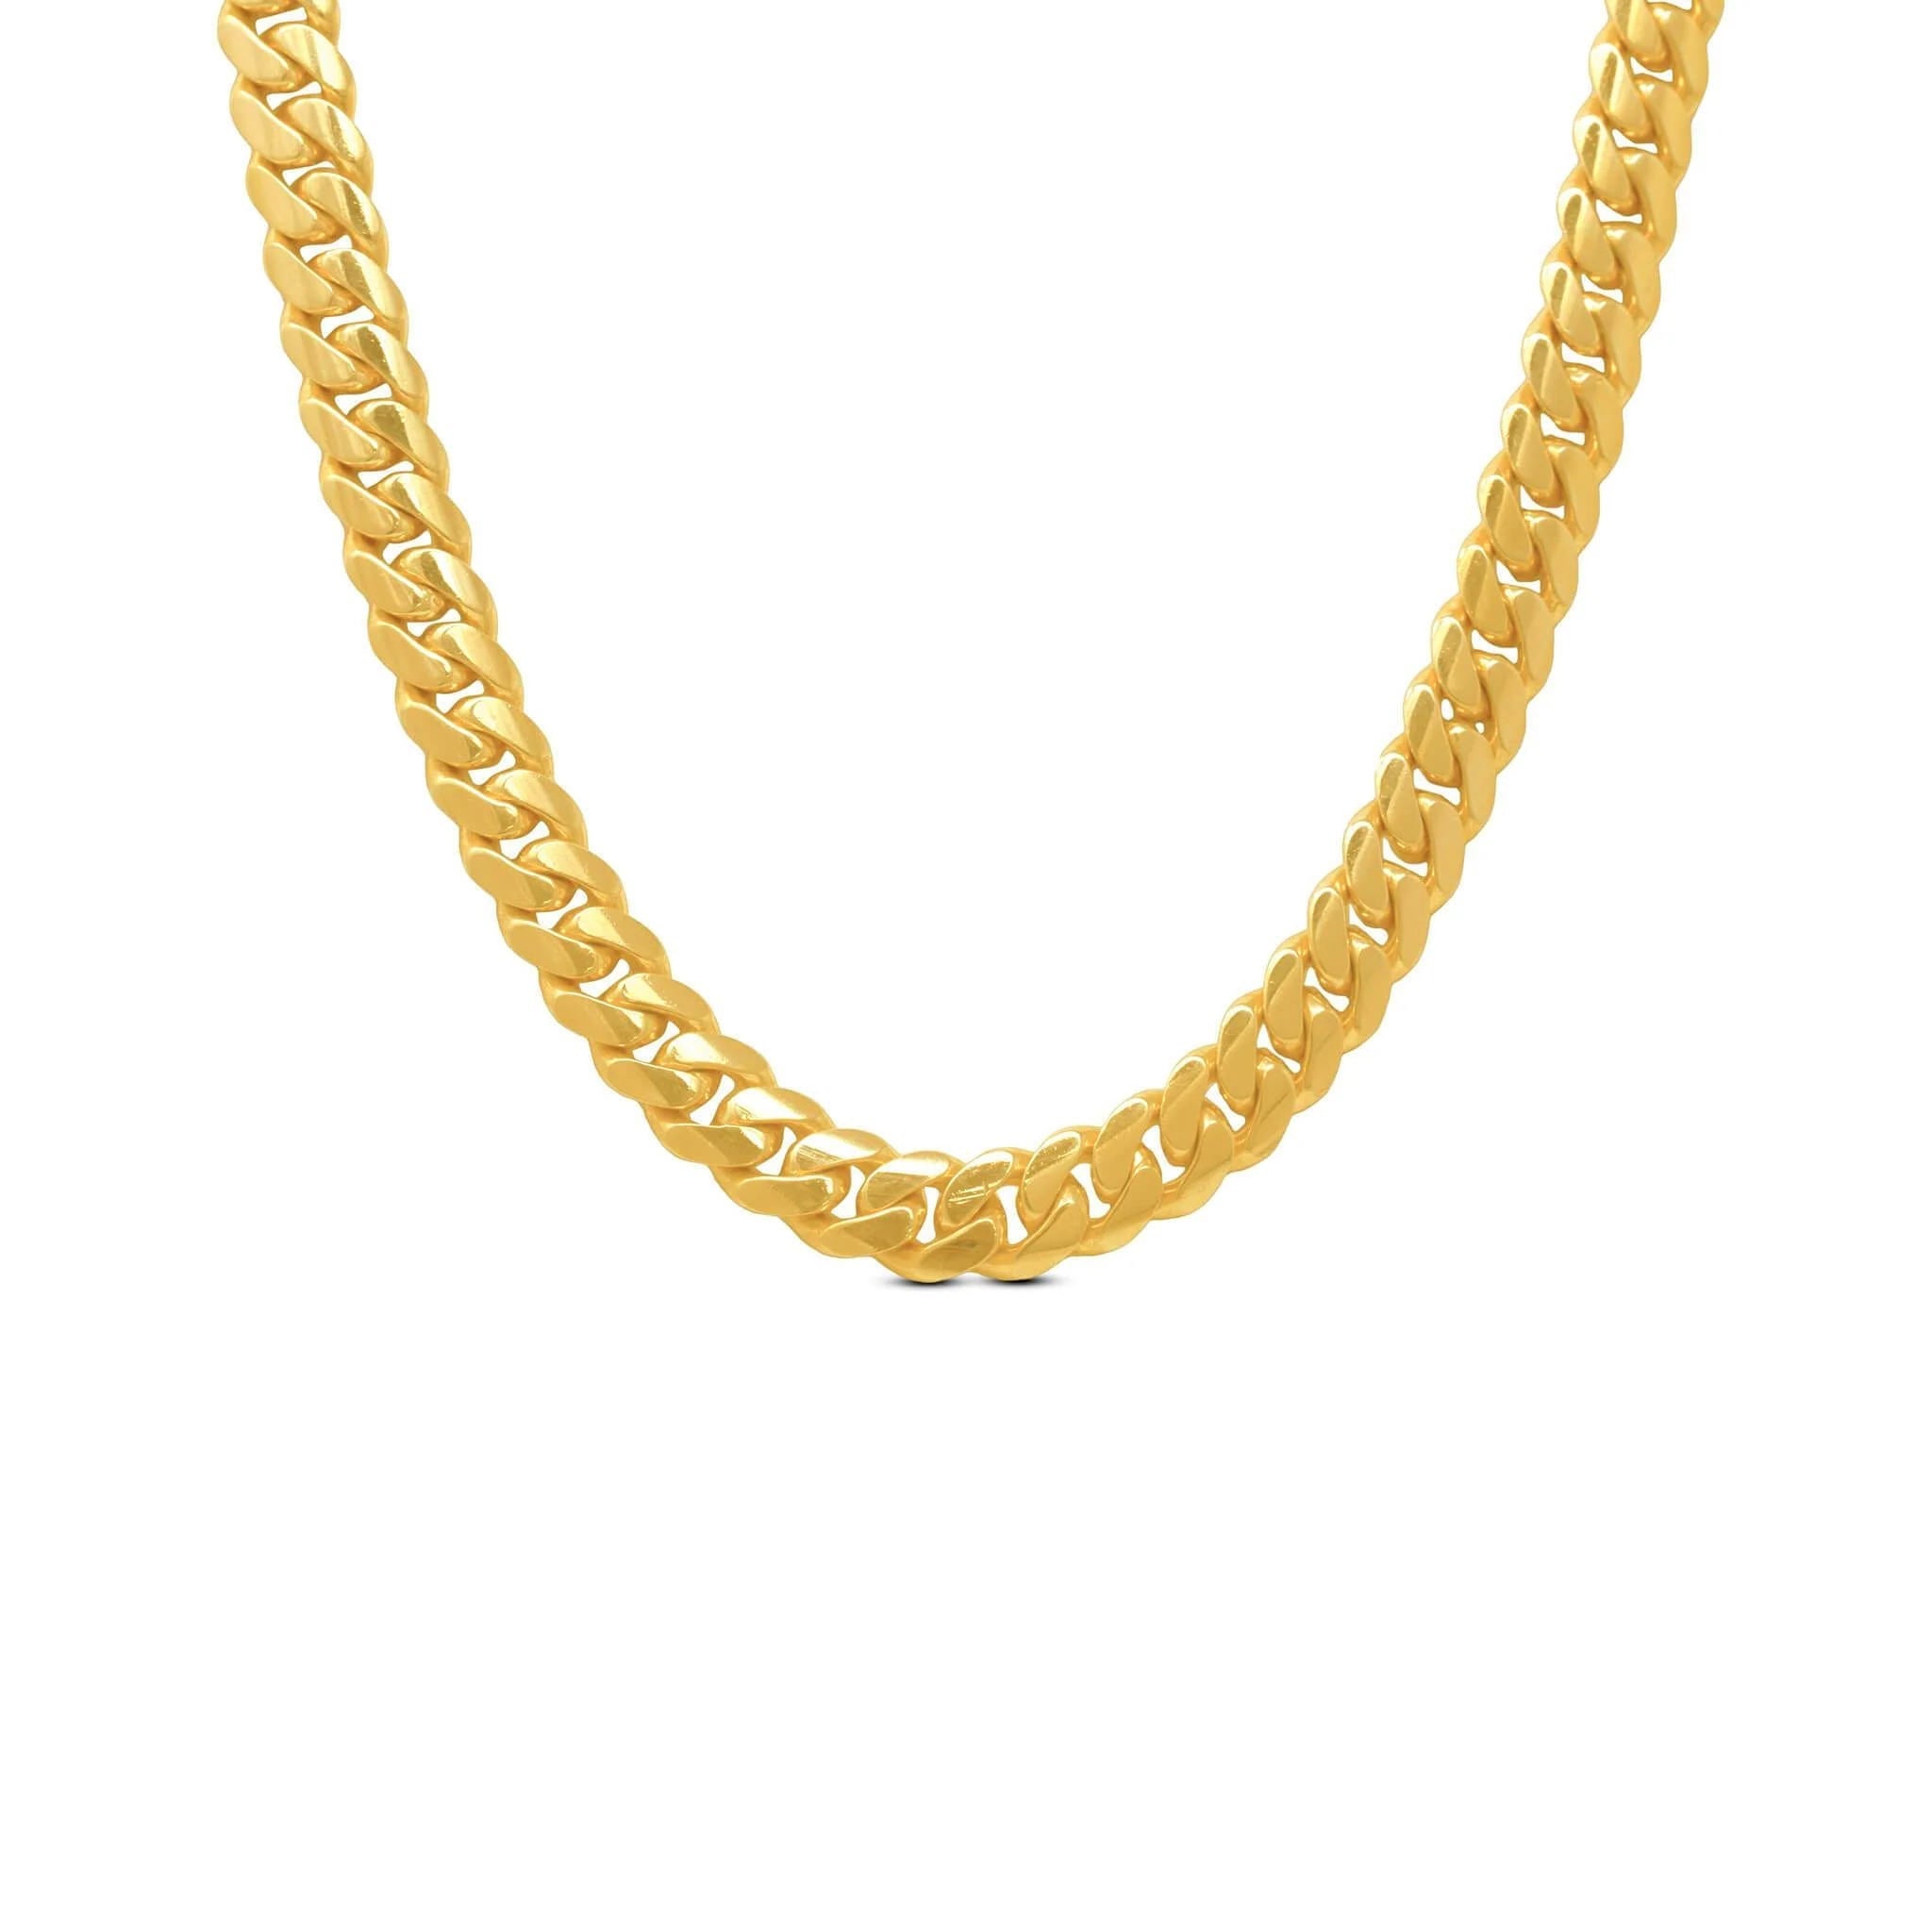 10mm Miami Cuban Link Chain in 14K Solid Yellow Gold